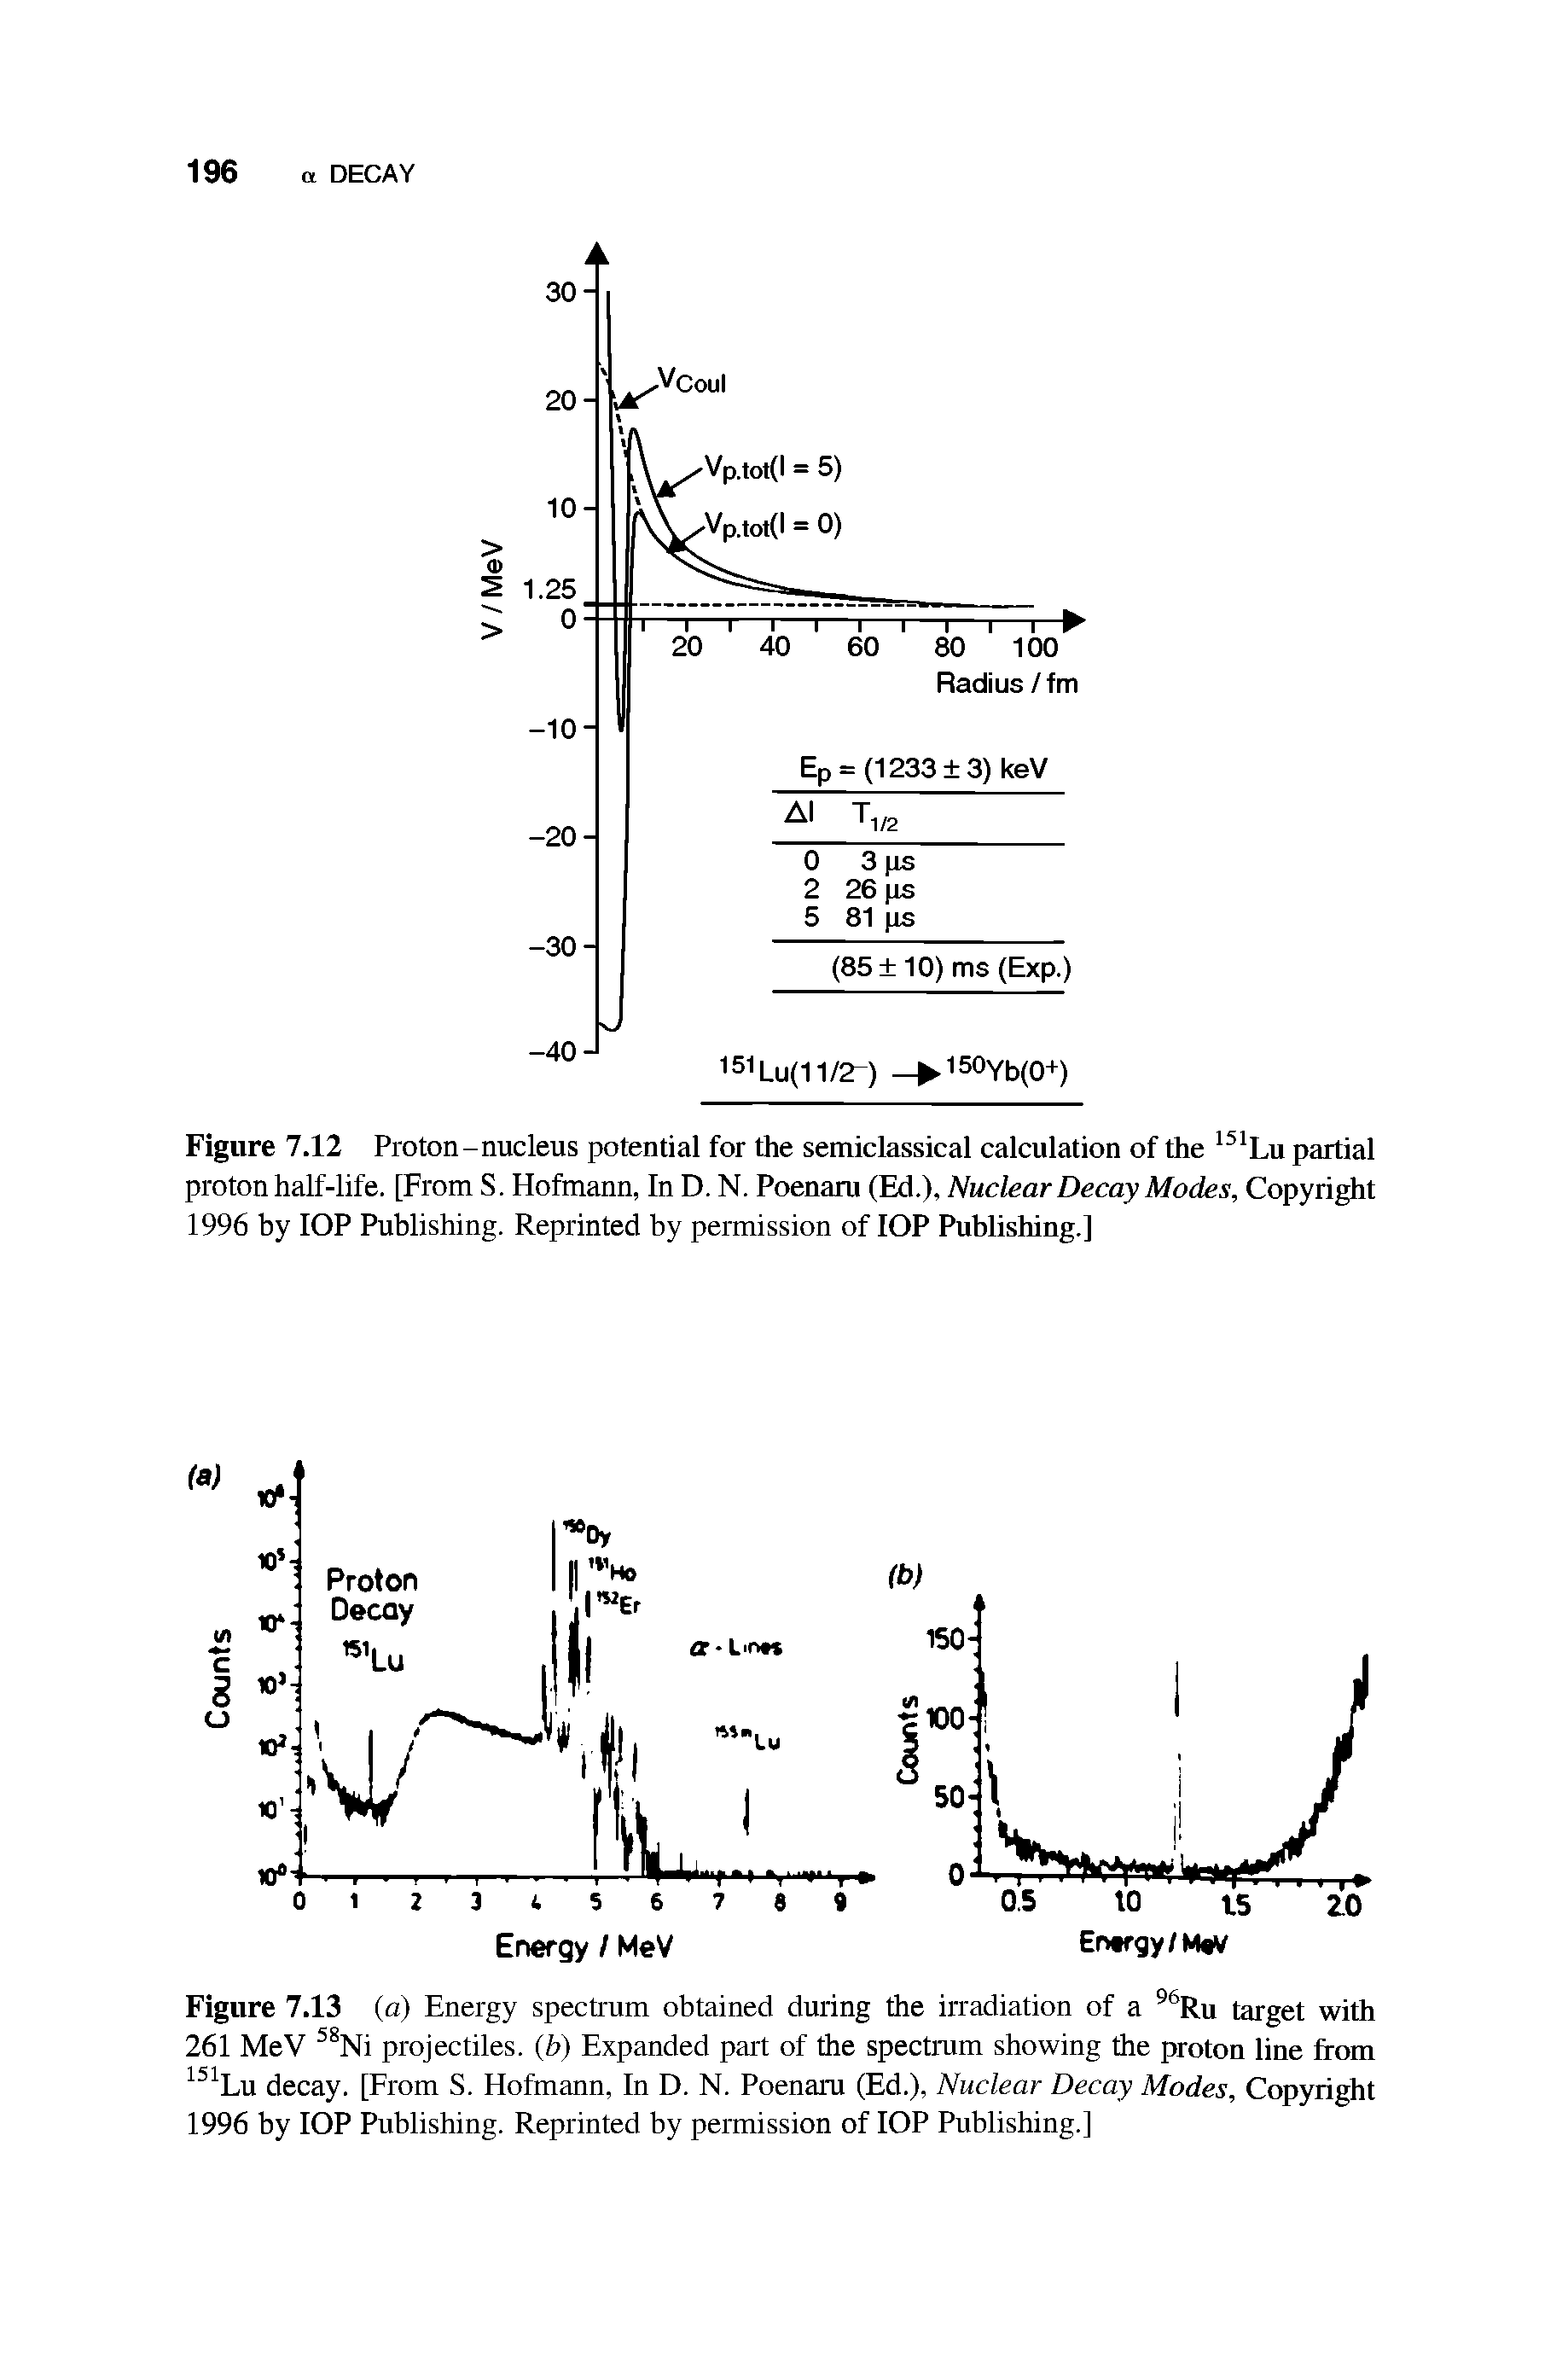 Figure 7.12 Proton-nucleus potential for the semiclassical calculation of the 151Lu partial proton half-life. [From S. Hofmann, In D. N. Poenaru (Ed.), Nuclear Decay Modes, Copyright 1996 by IOP Publishing. Reprinted by permission of IOP Publishing.]...